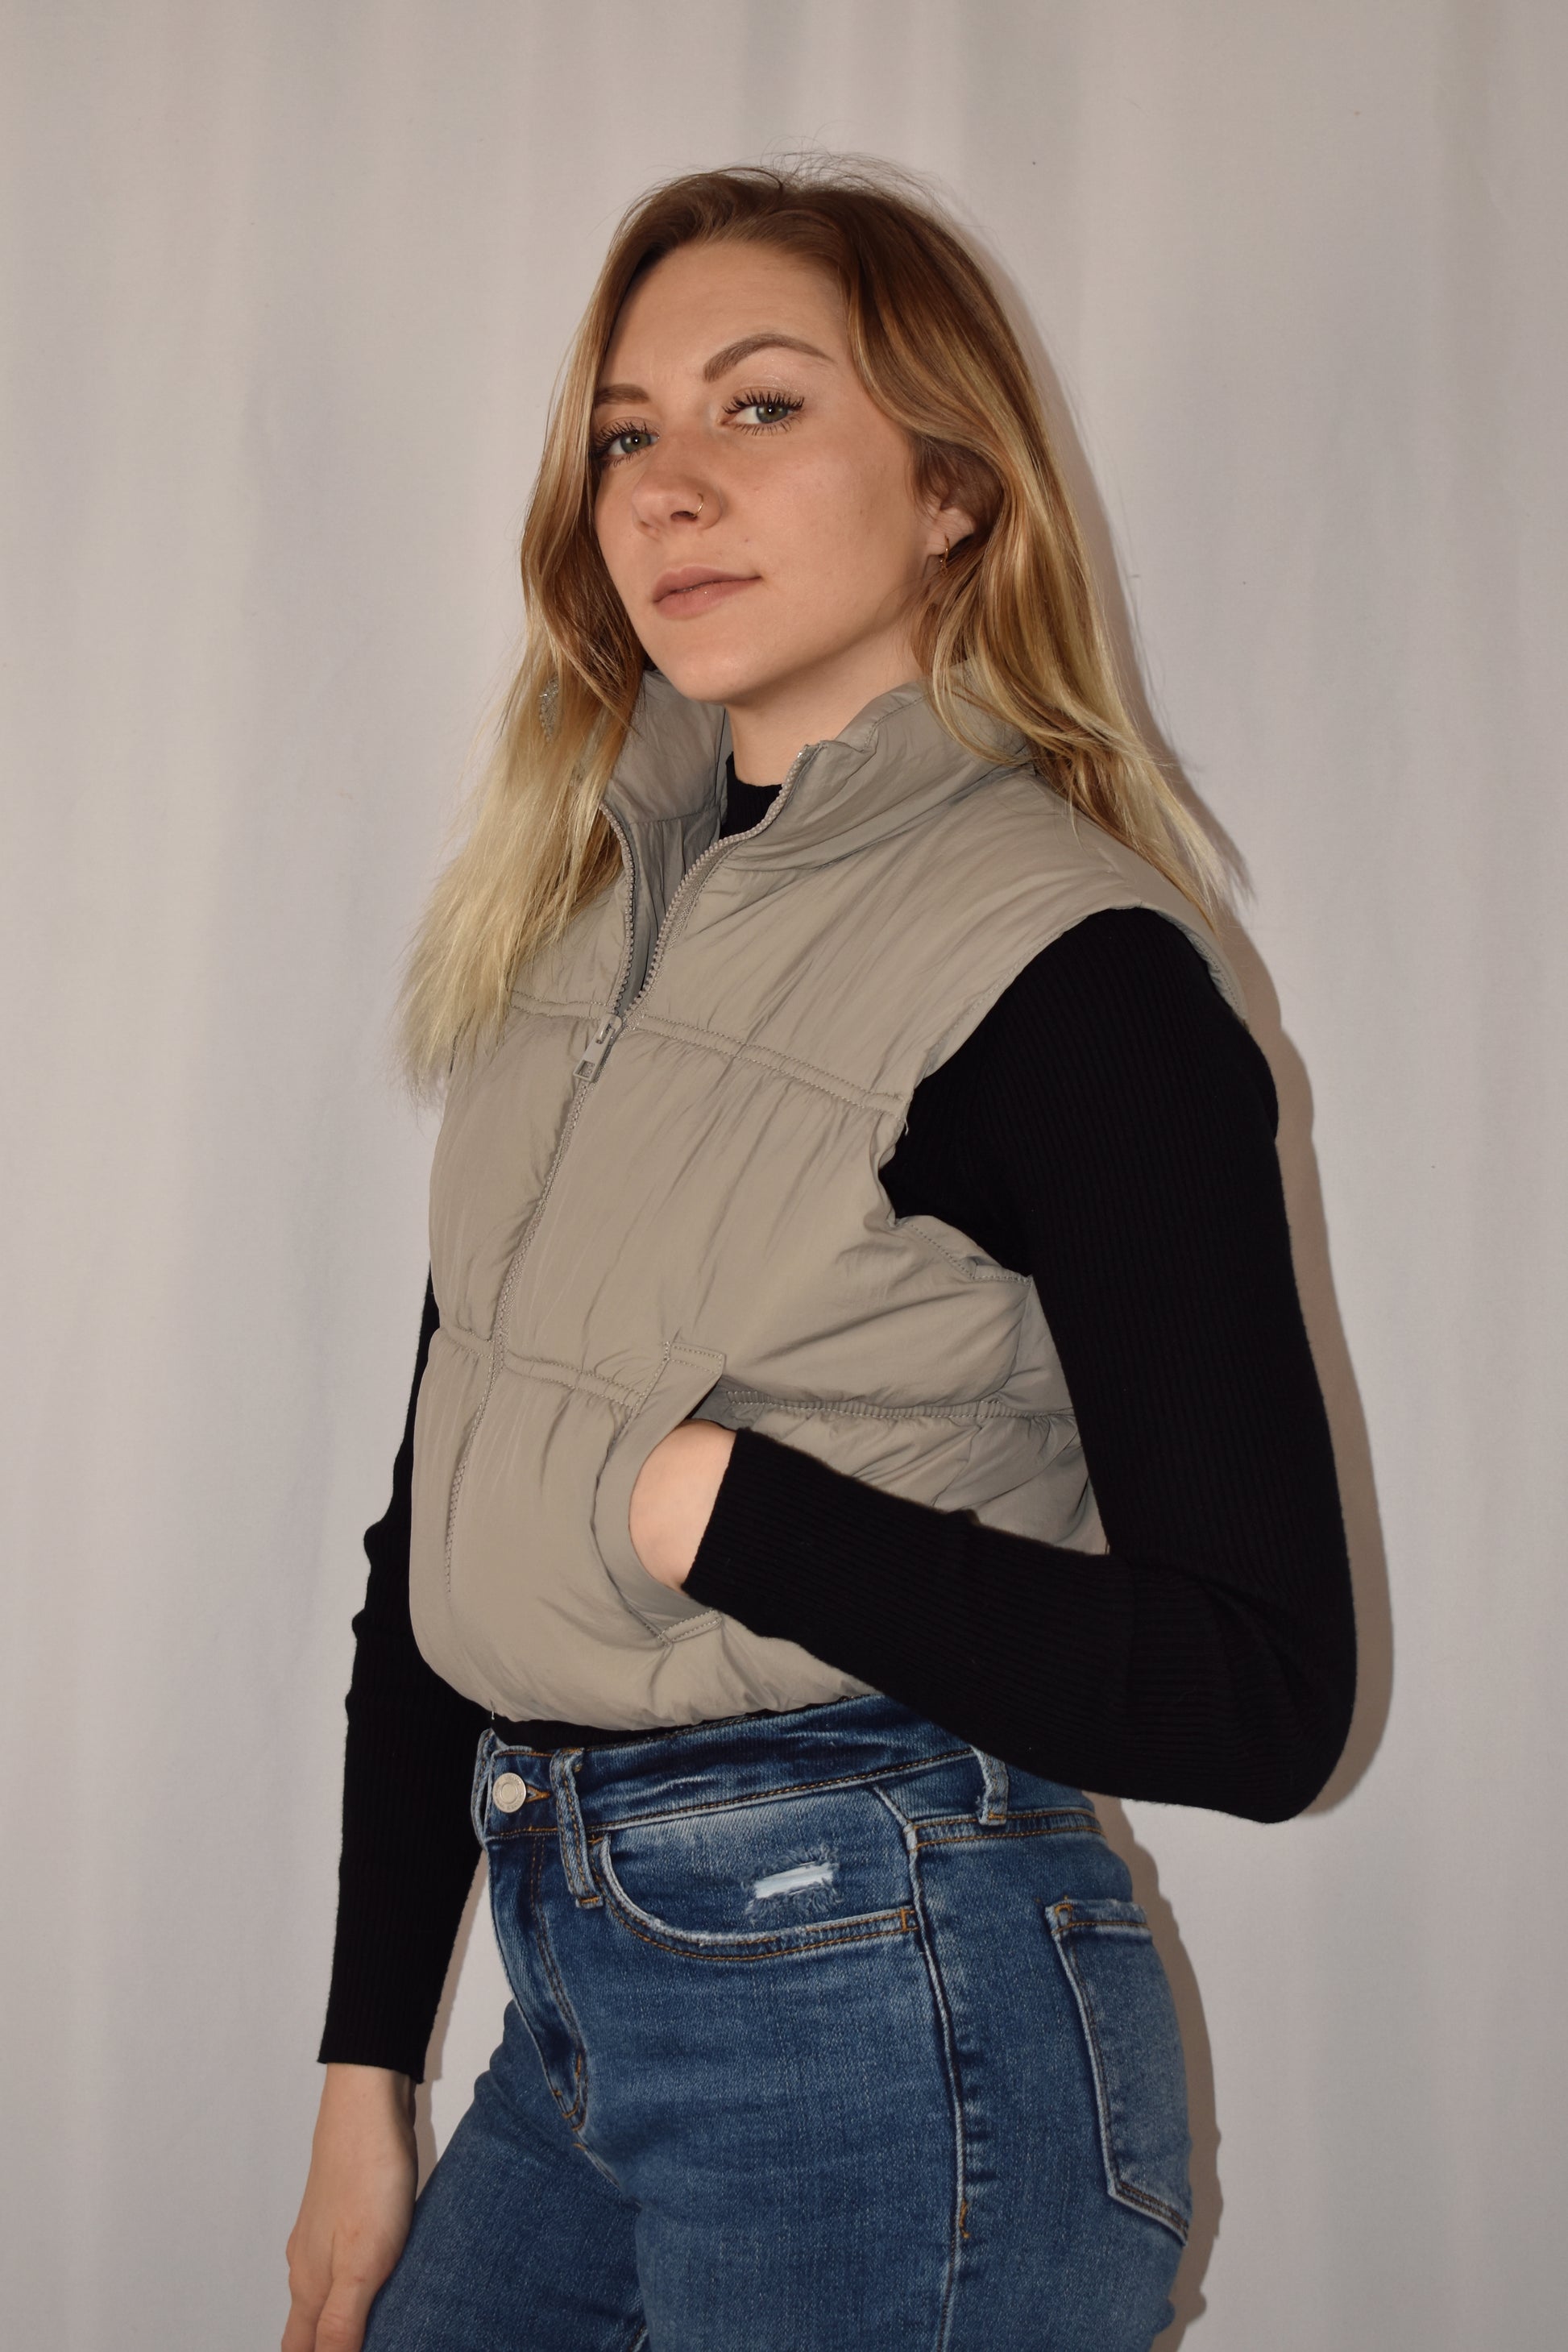 Cropped puffer vest with tight synching and side pockets. Zipper front enclosure. 